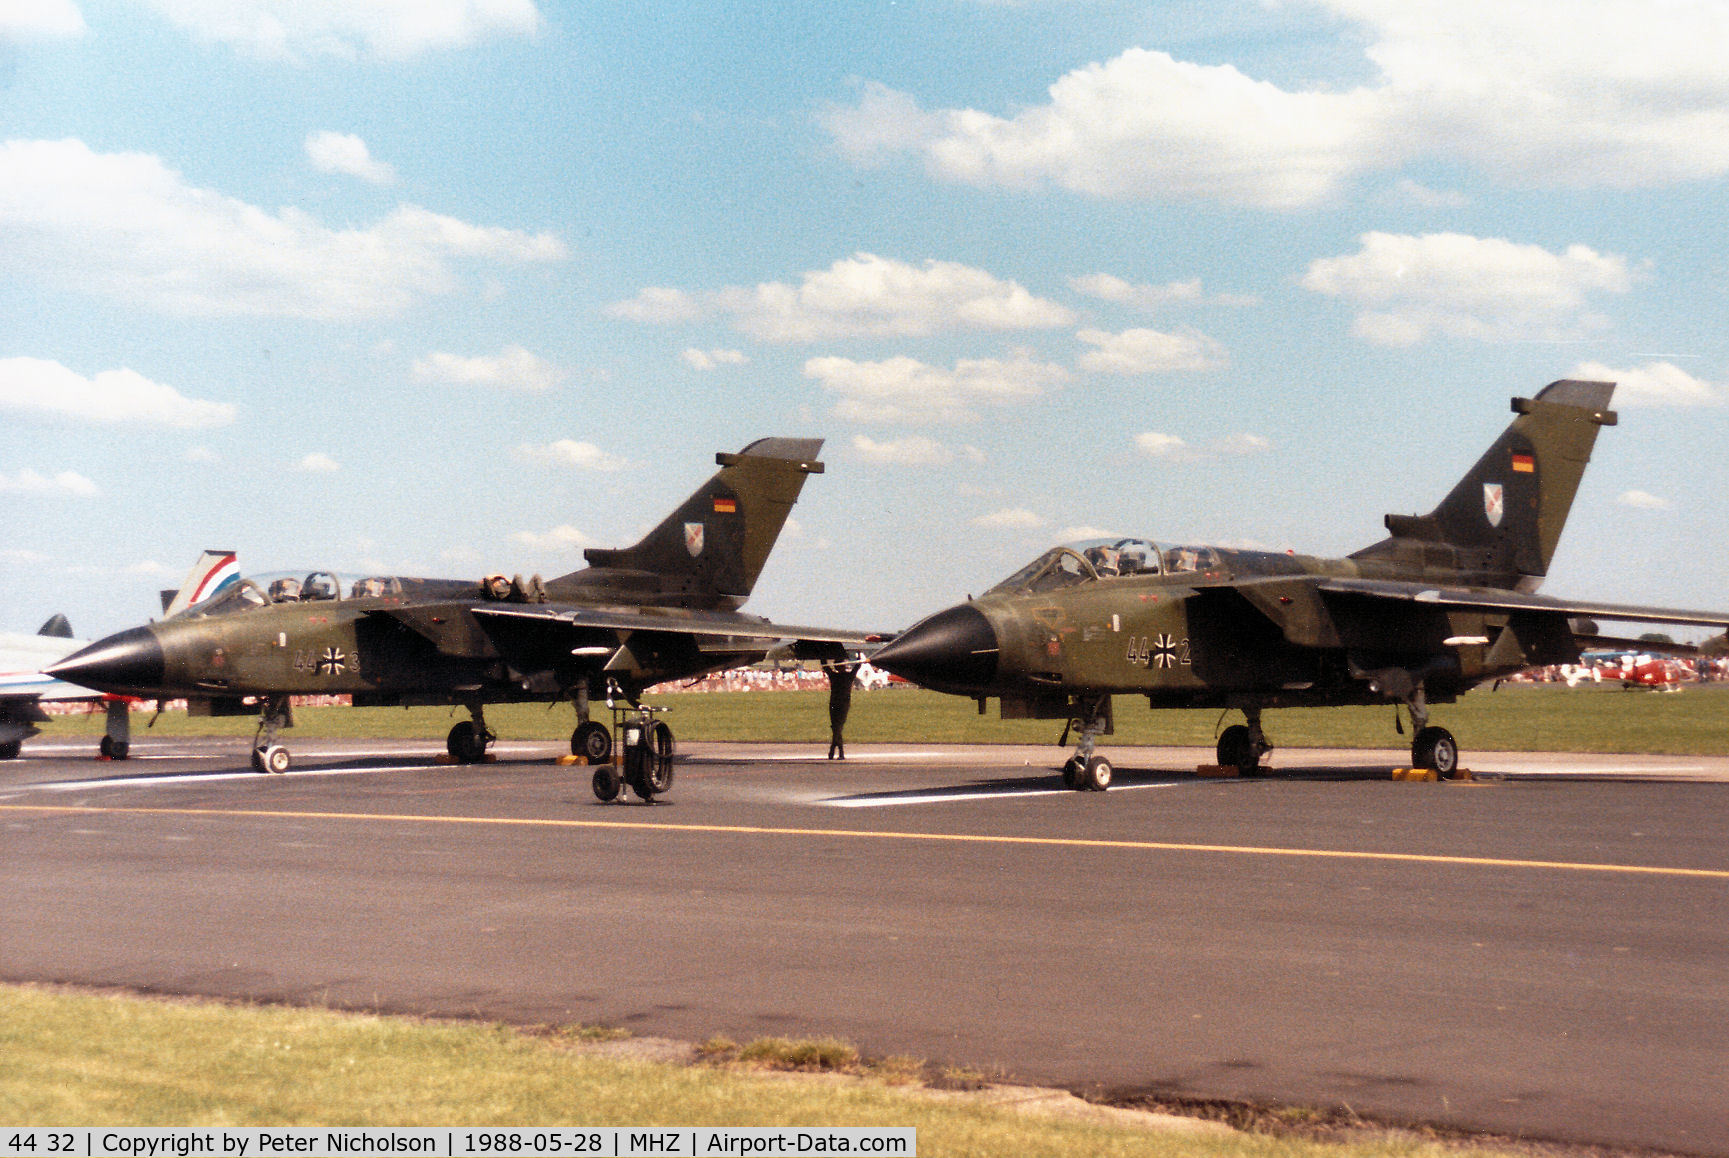 44 32, Panavia Tornado IDS C/N 335/GS093/4132, Tornado IDS of German Air Force's JBG-31 with companion 44+28 on the flight-line at the 1988 RAF Mildenhall Air Fete.